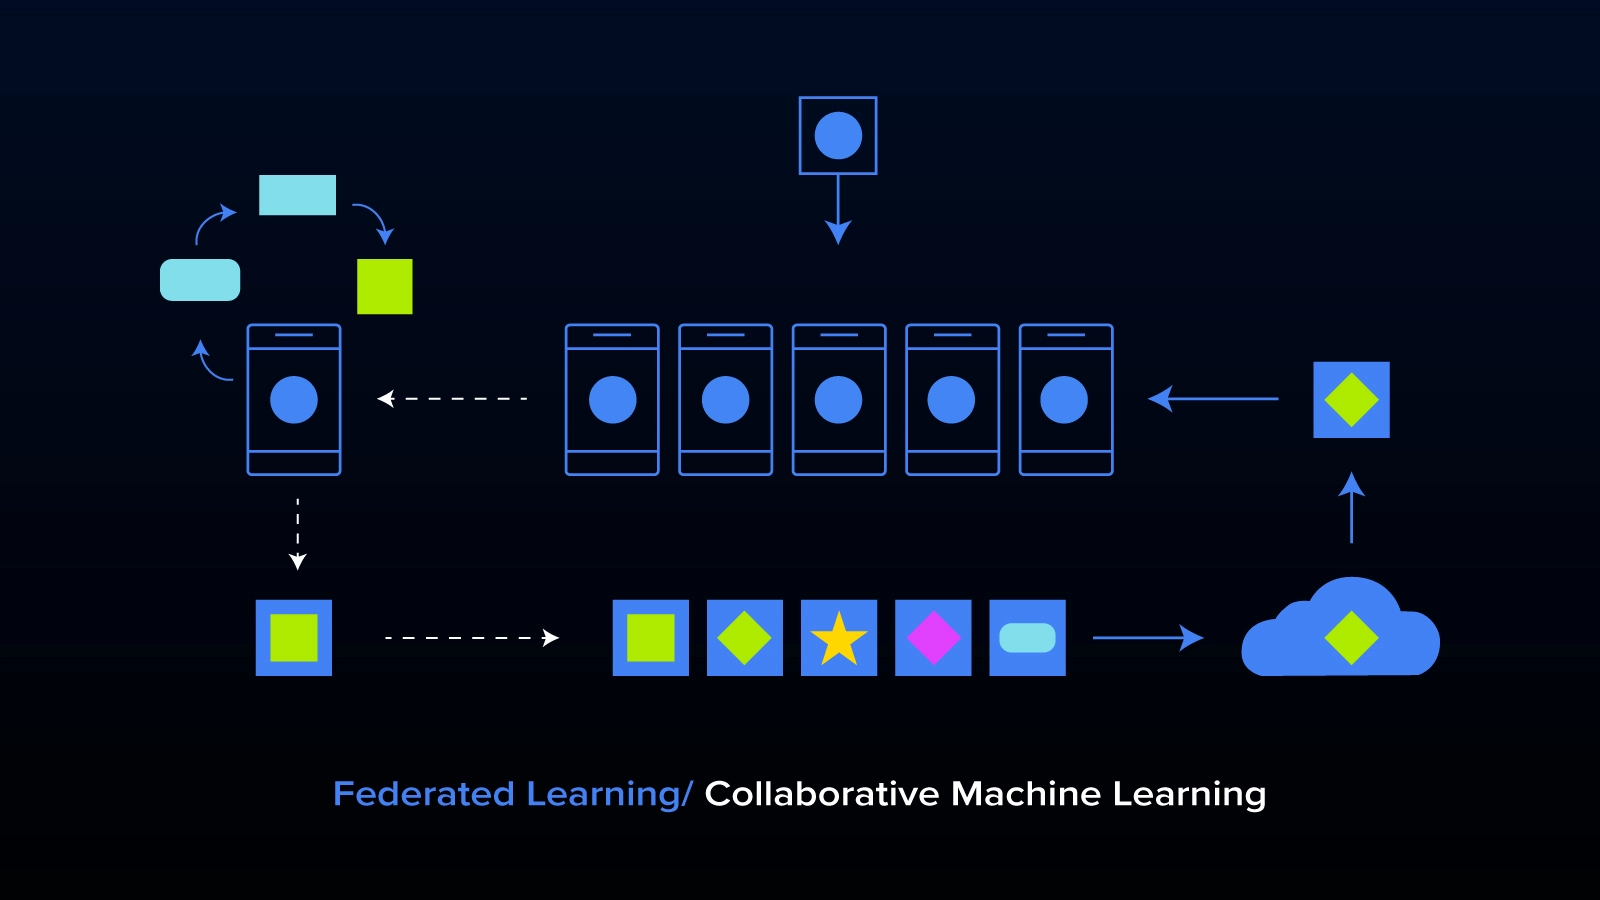 Federated-Learning-Collaborative-Machine-Learning-blog.jpg